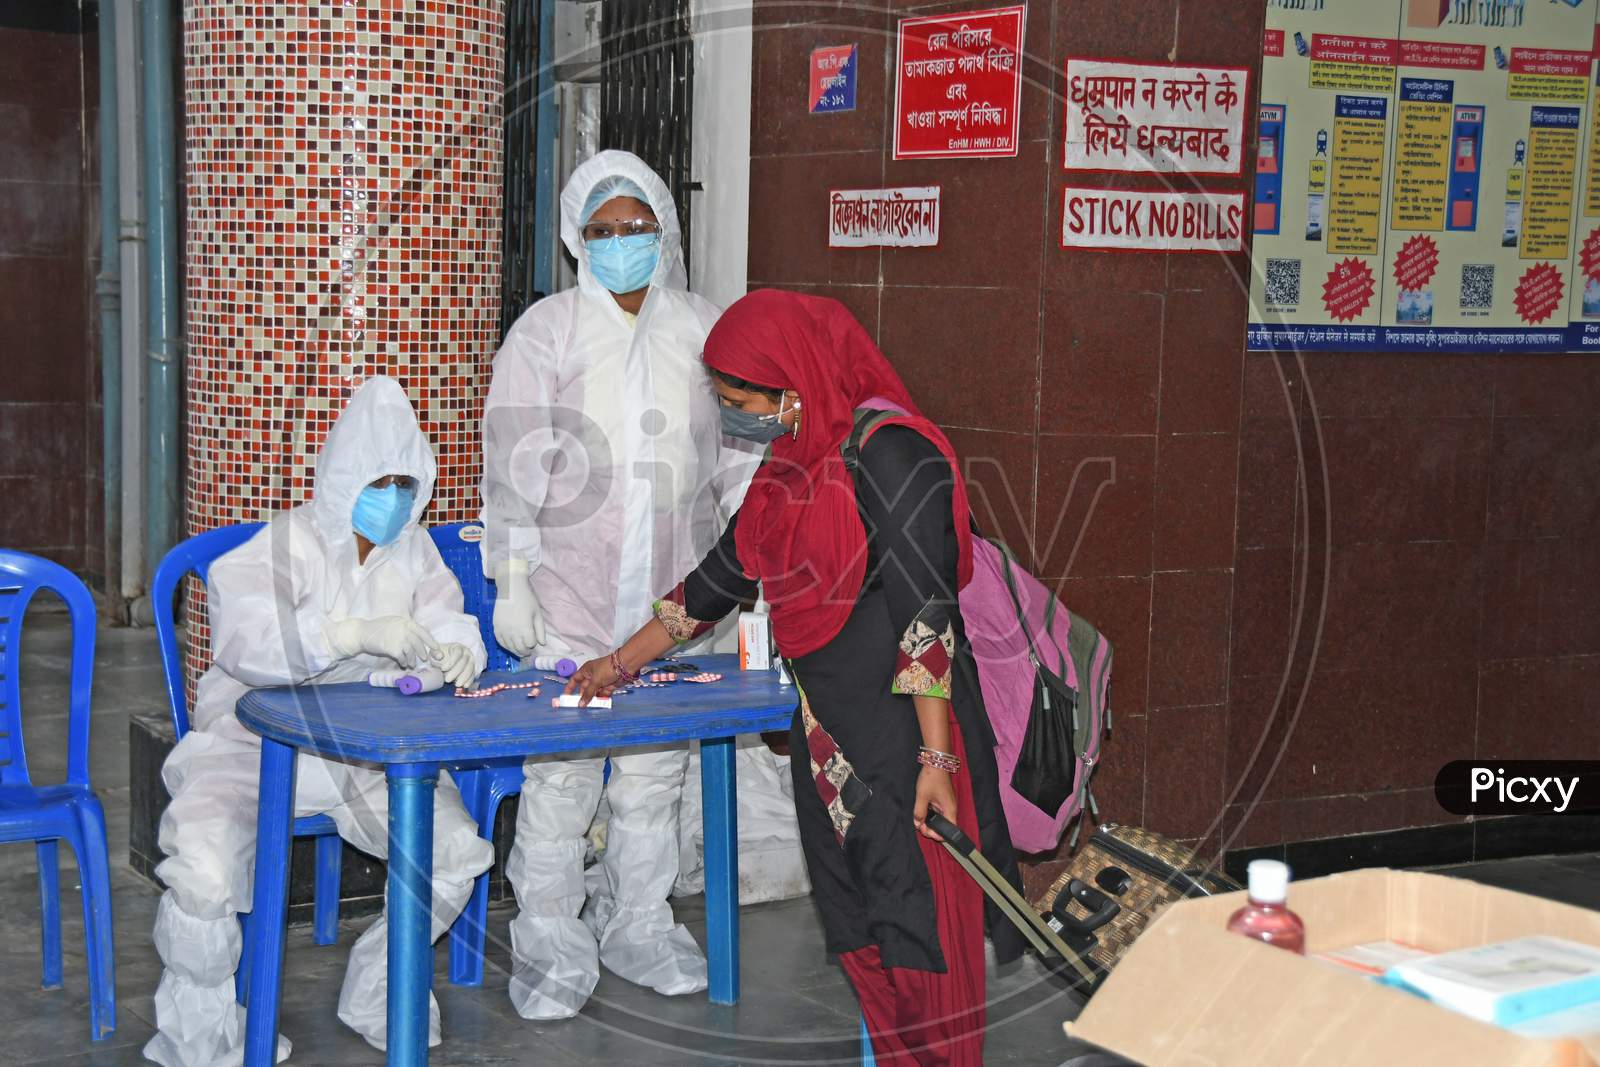 The migrant workers returning to Burdwan (Home Town) on the 'Shramik Special' Train from Chennai are undergoing health screening for Novel Coronavirus (COVID-19) testing.